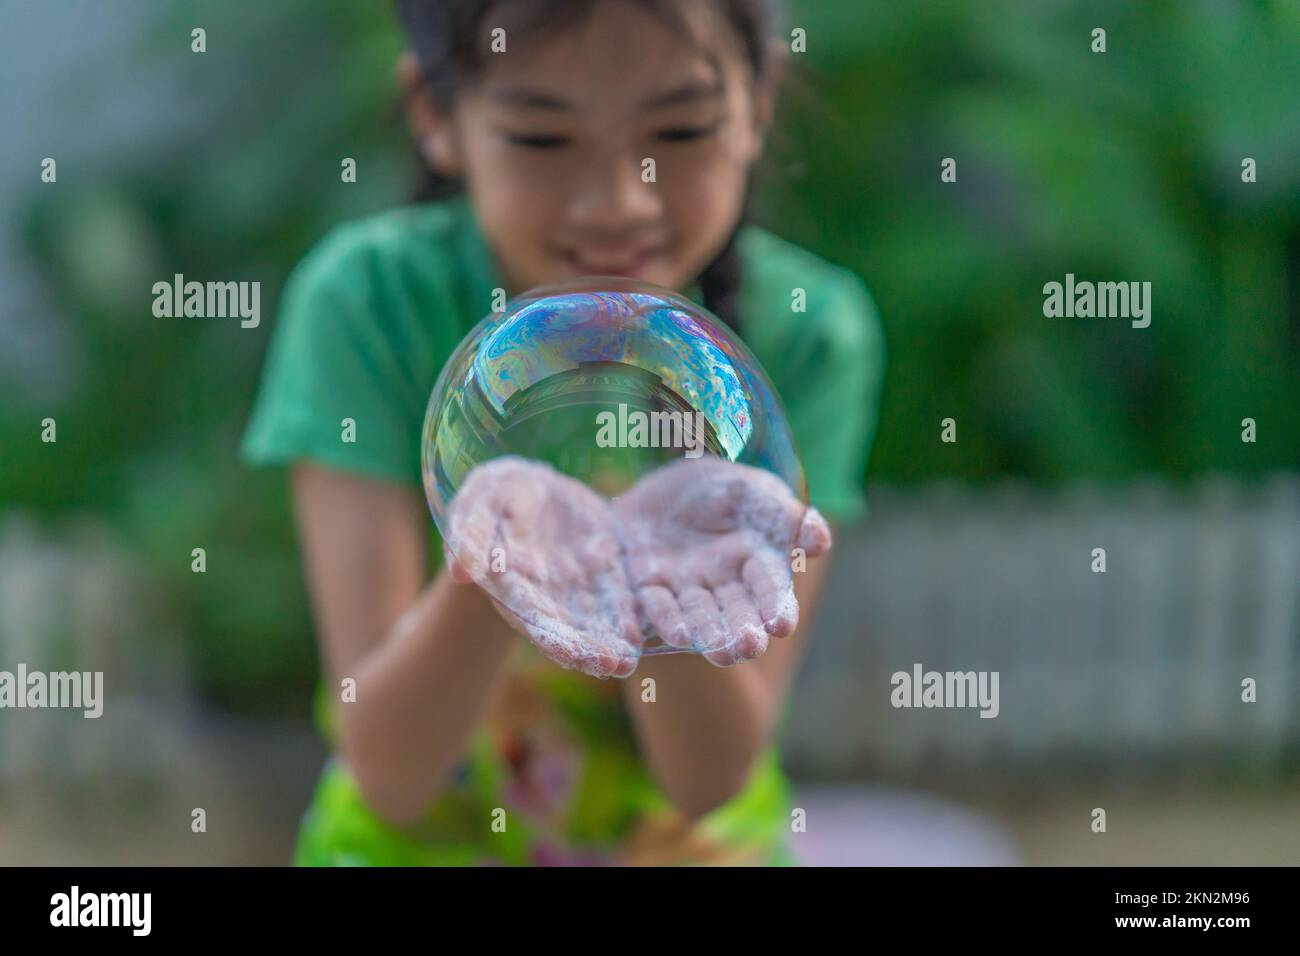 A young girl making bubbles in a garden. Stock Photo